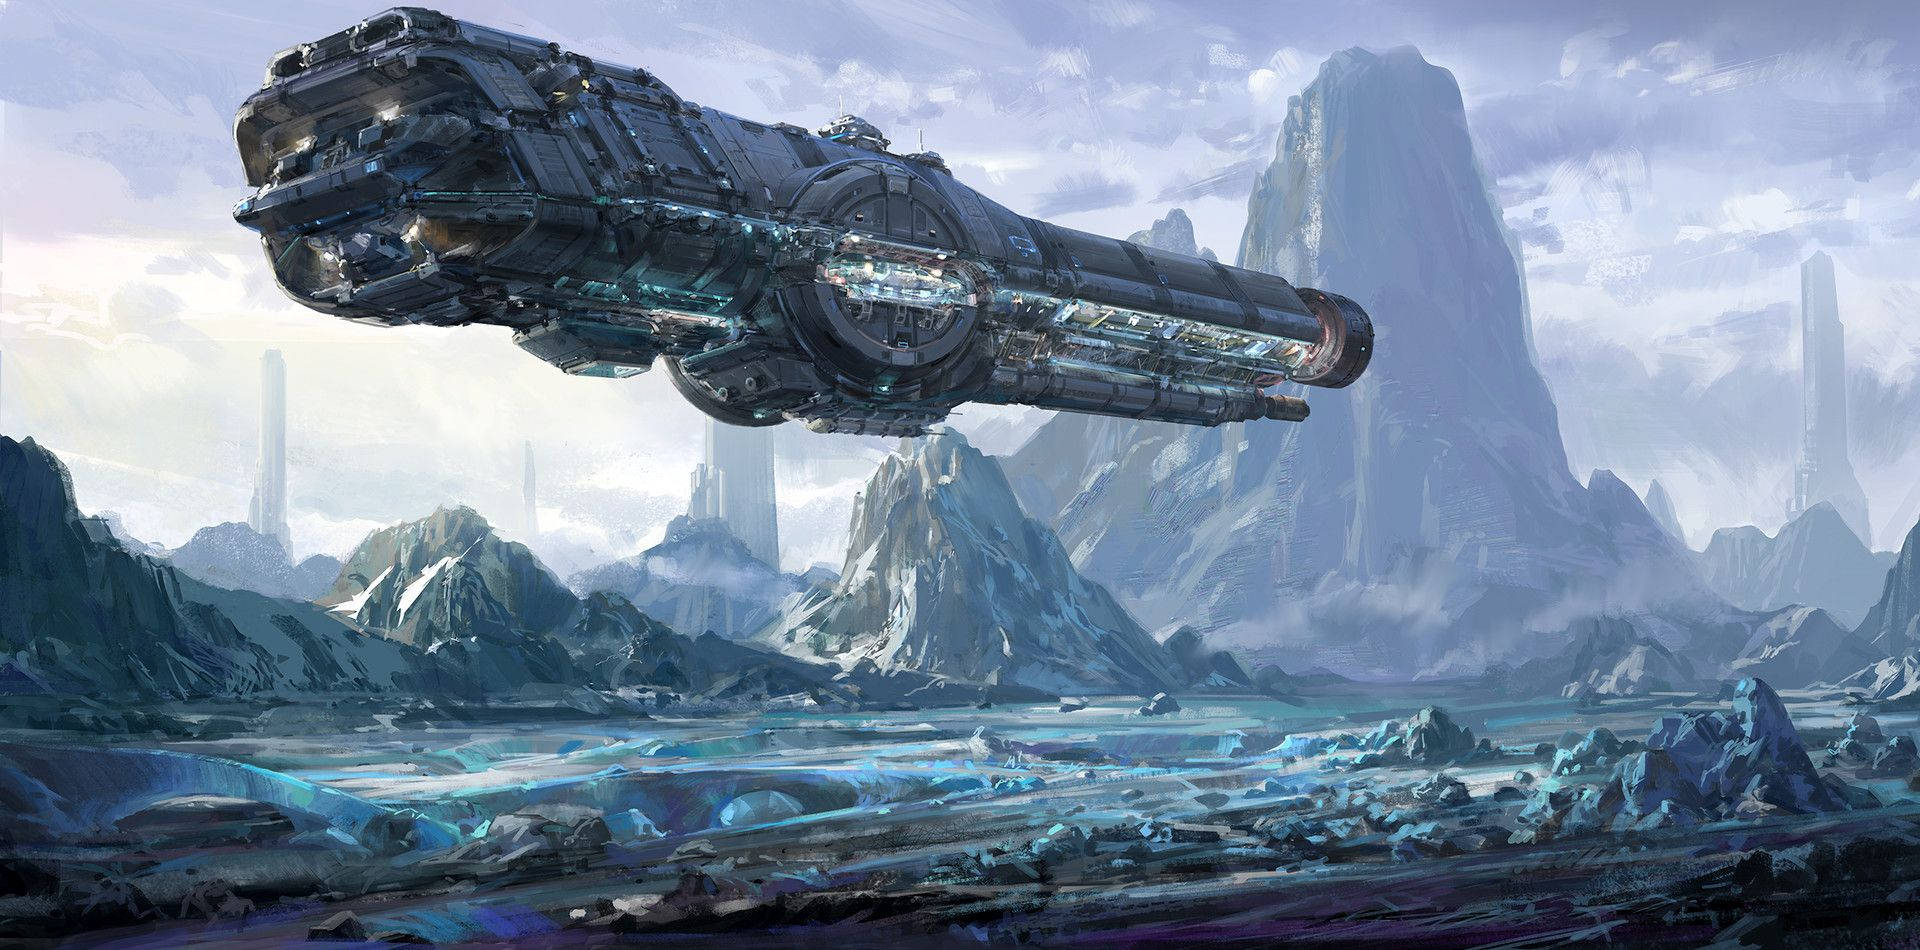 Sci-fi Spaceship In The Mountains Background